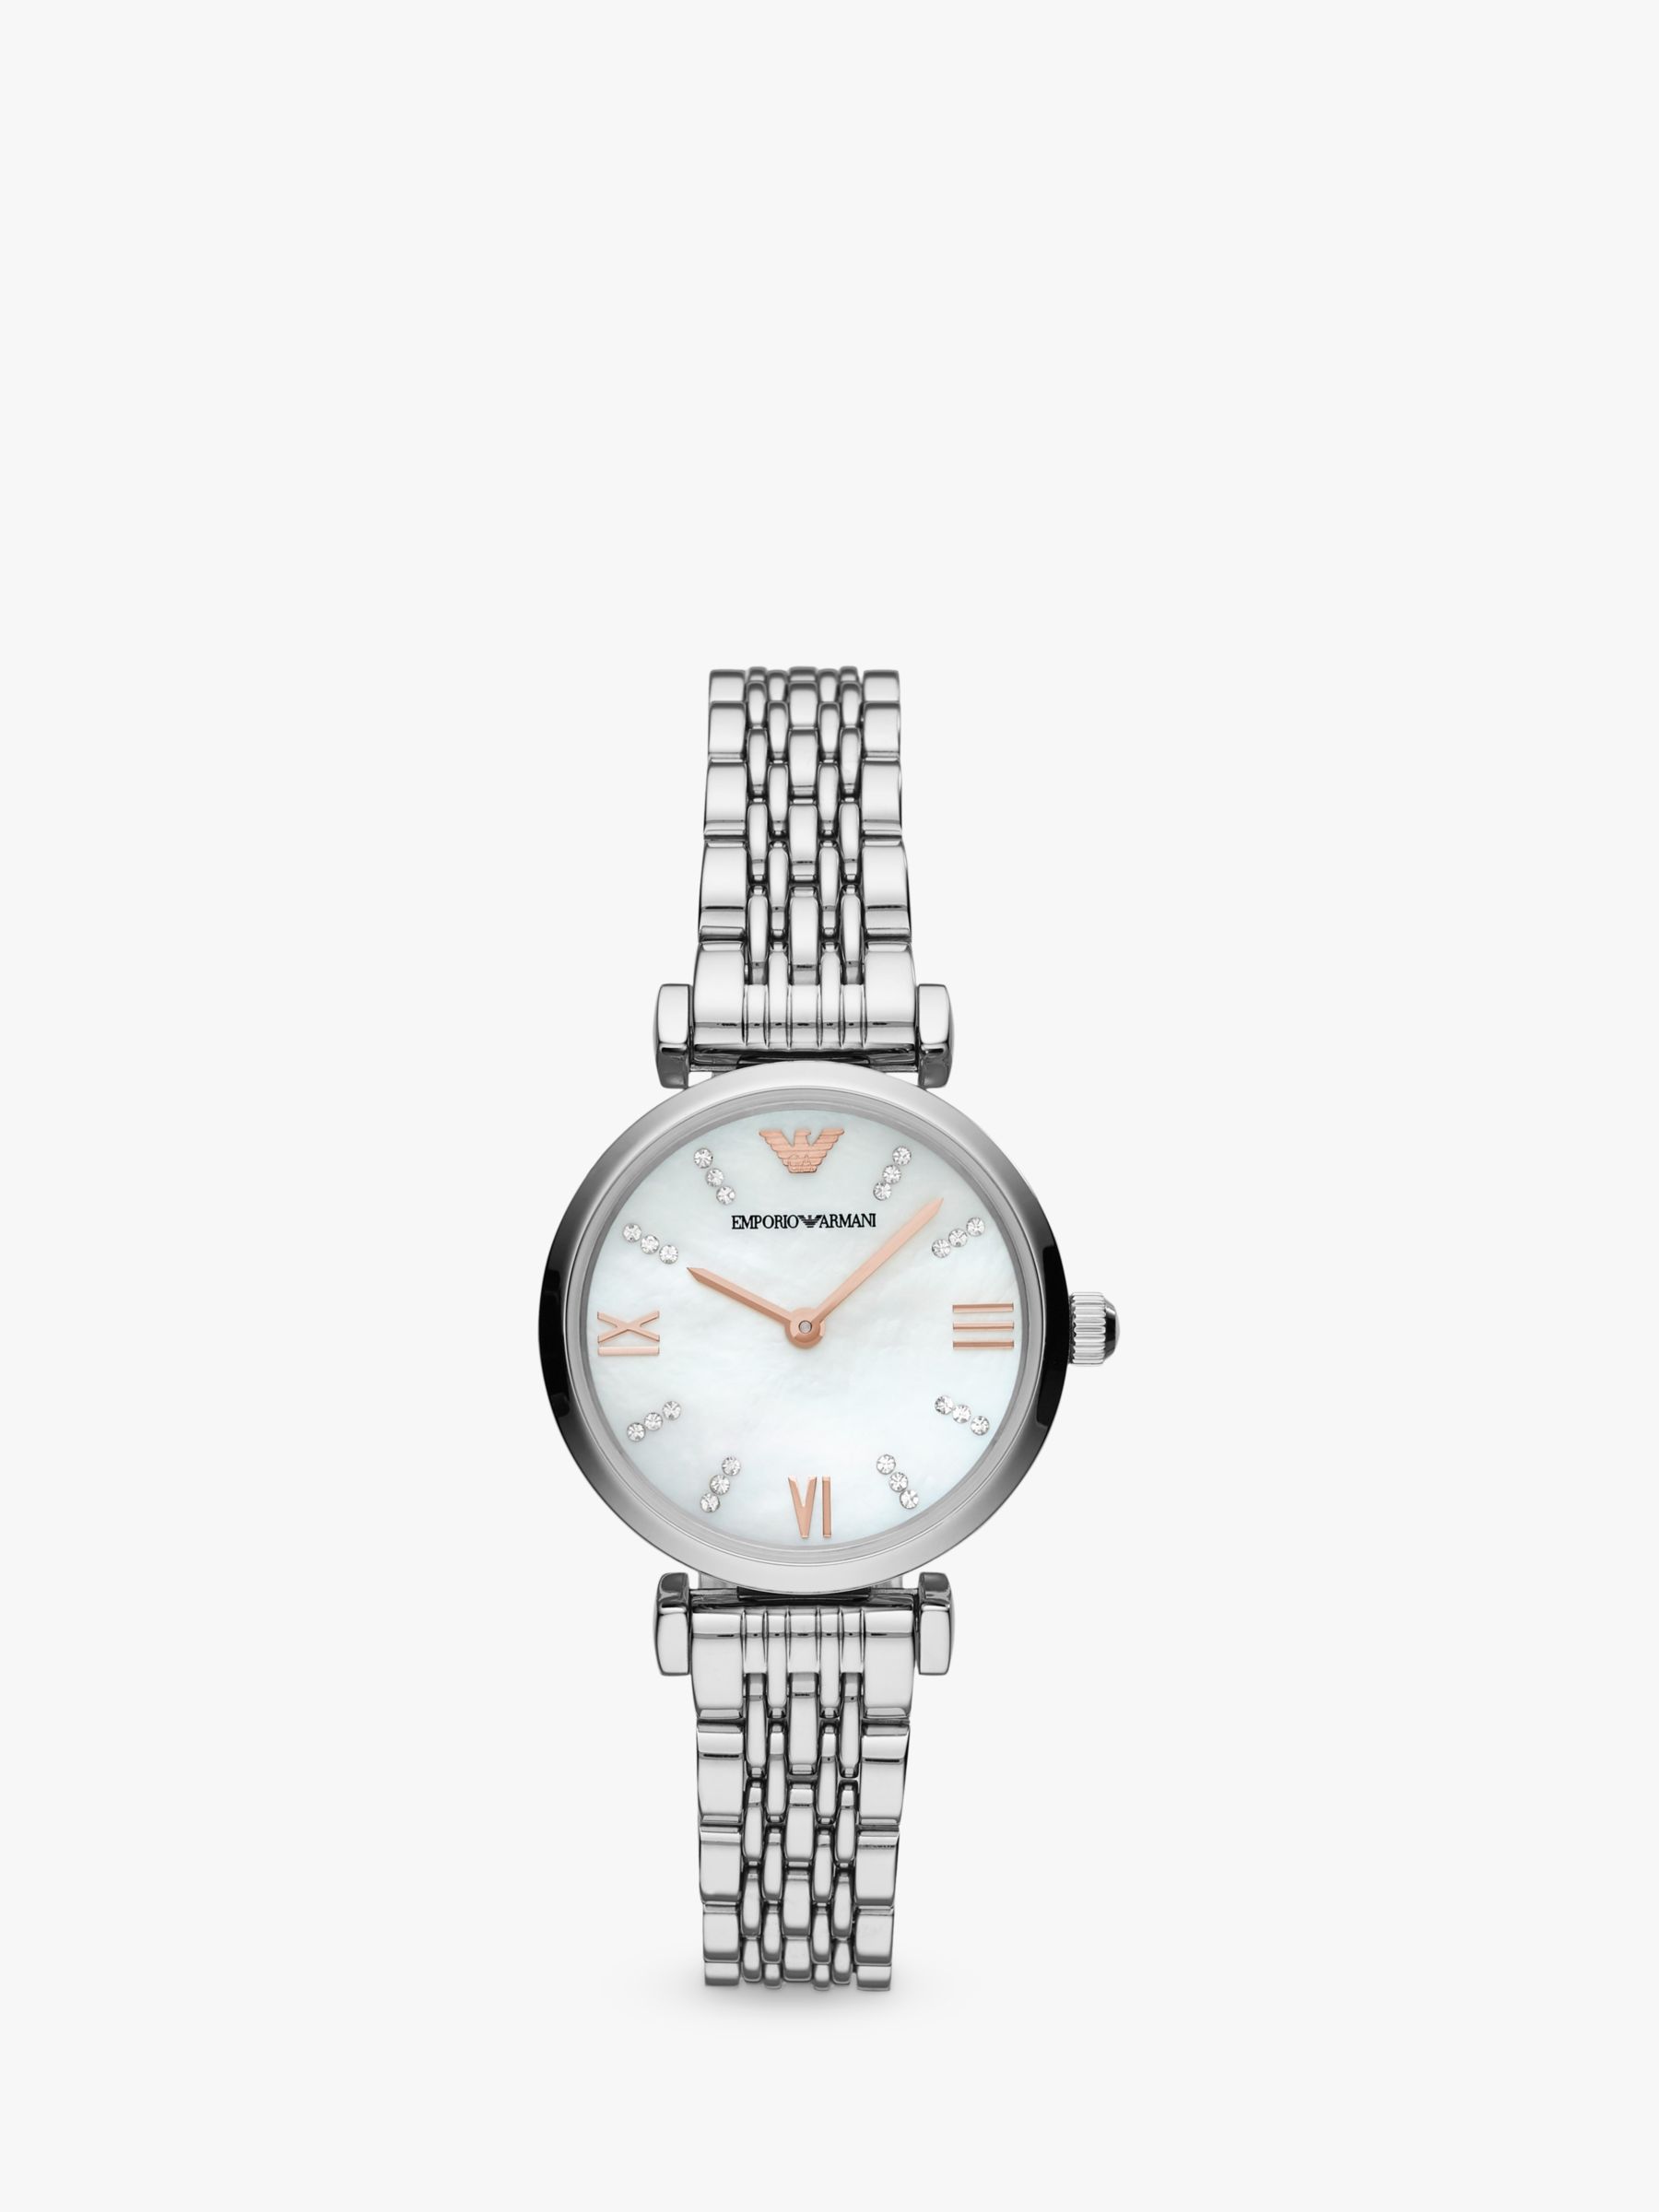 emporio armani mother of pearl watch